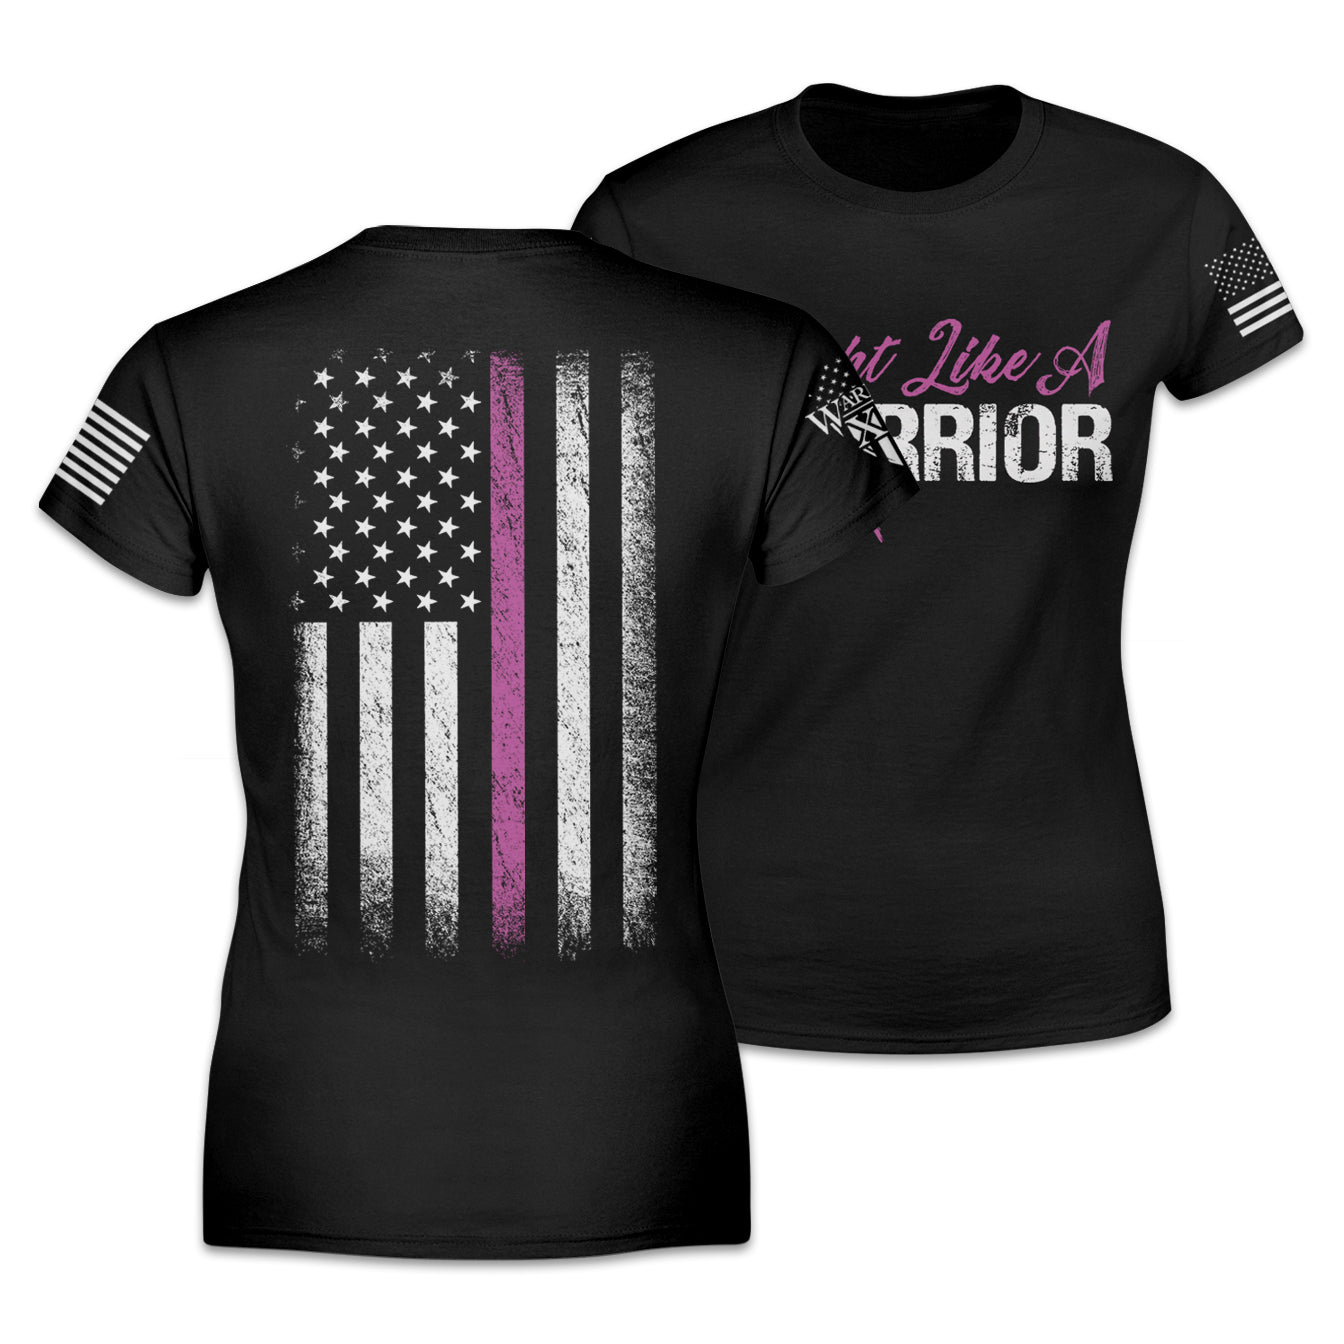 Front & back black relaxed fit'shirt with shirt features a thin pink line flag to show support for all breast cancer warriors printed on the shirt.